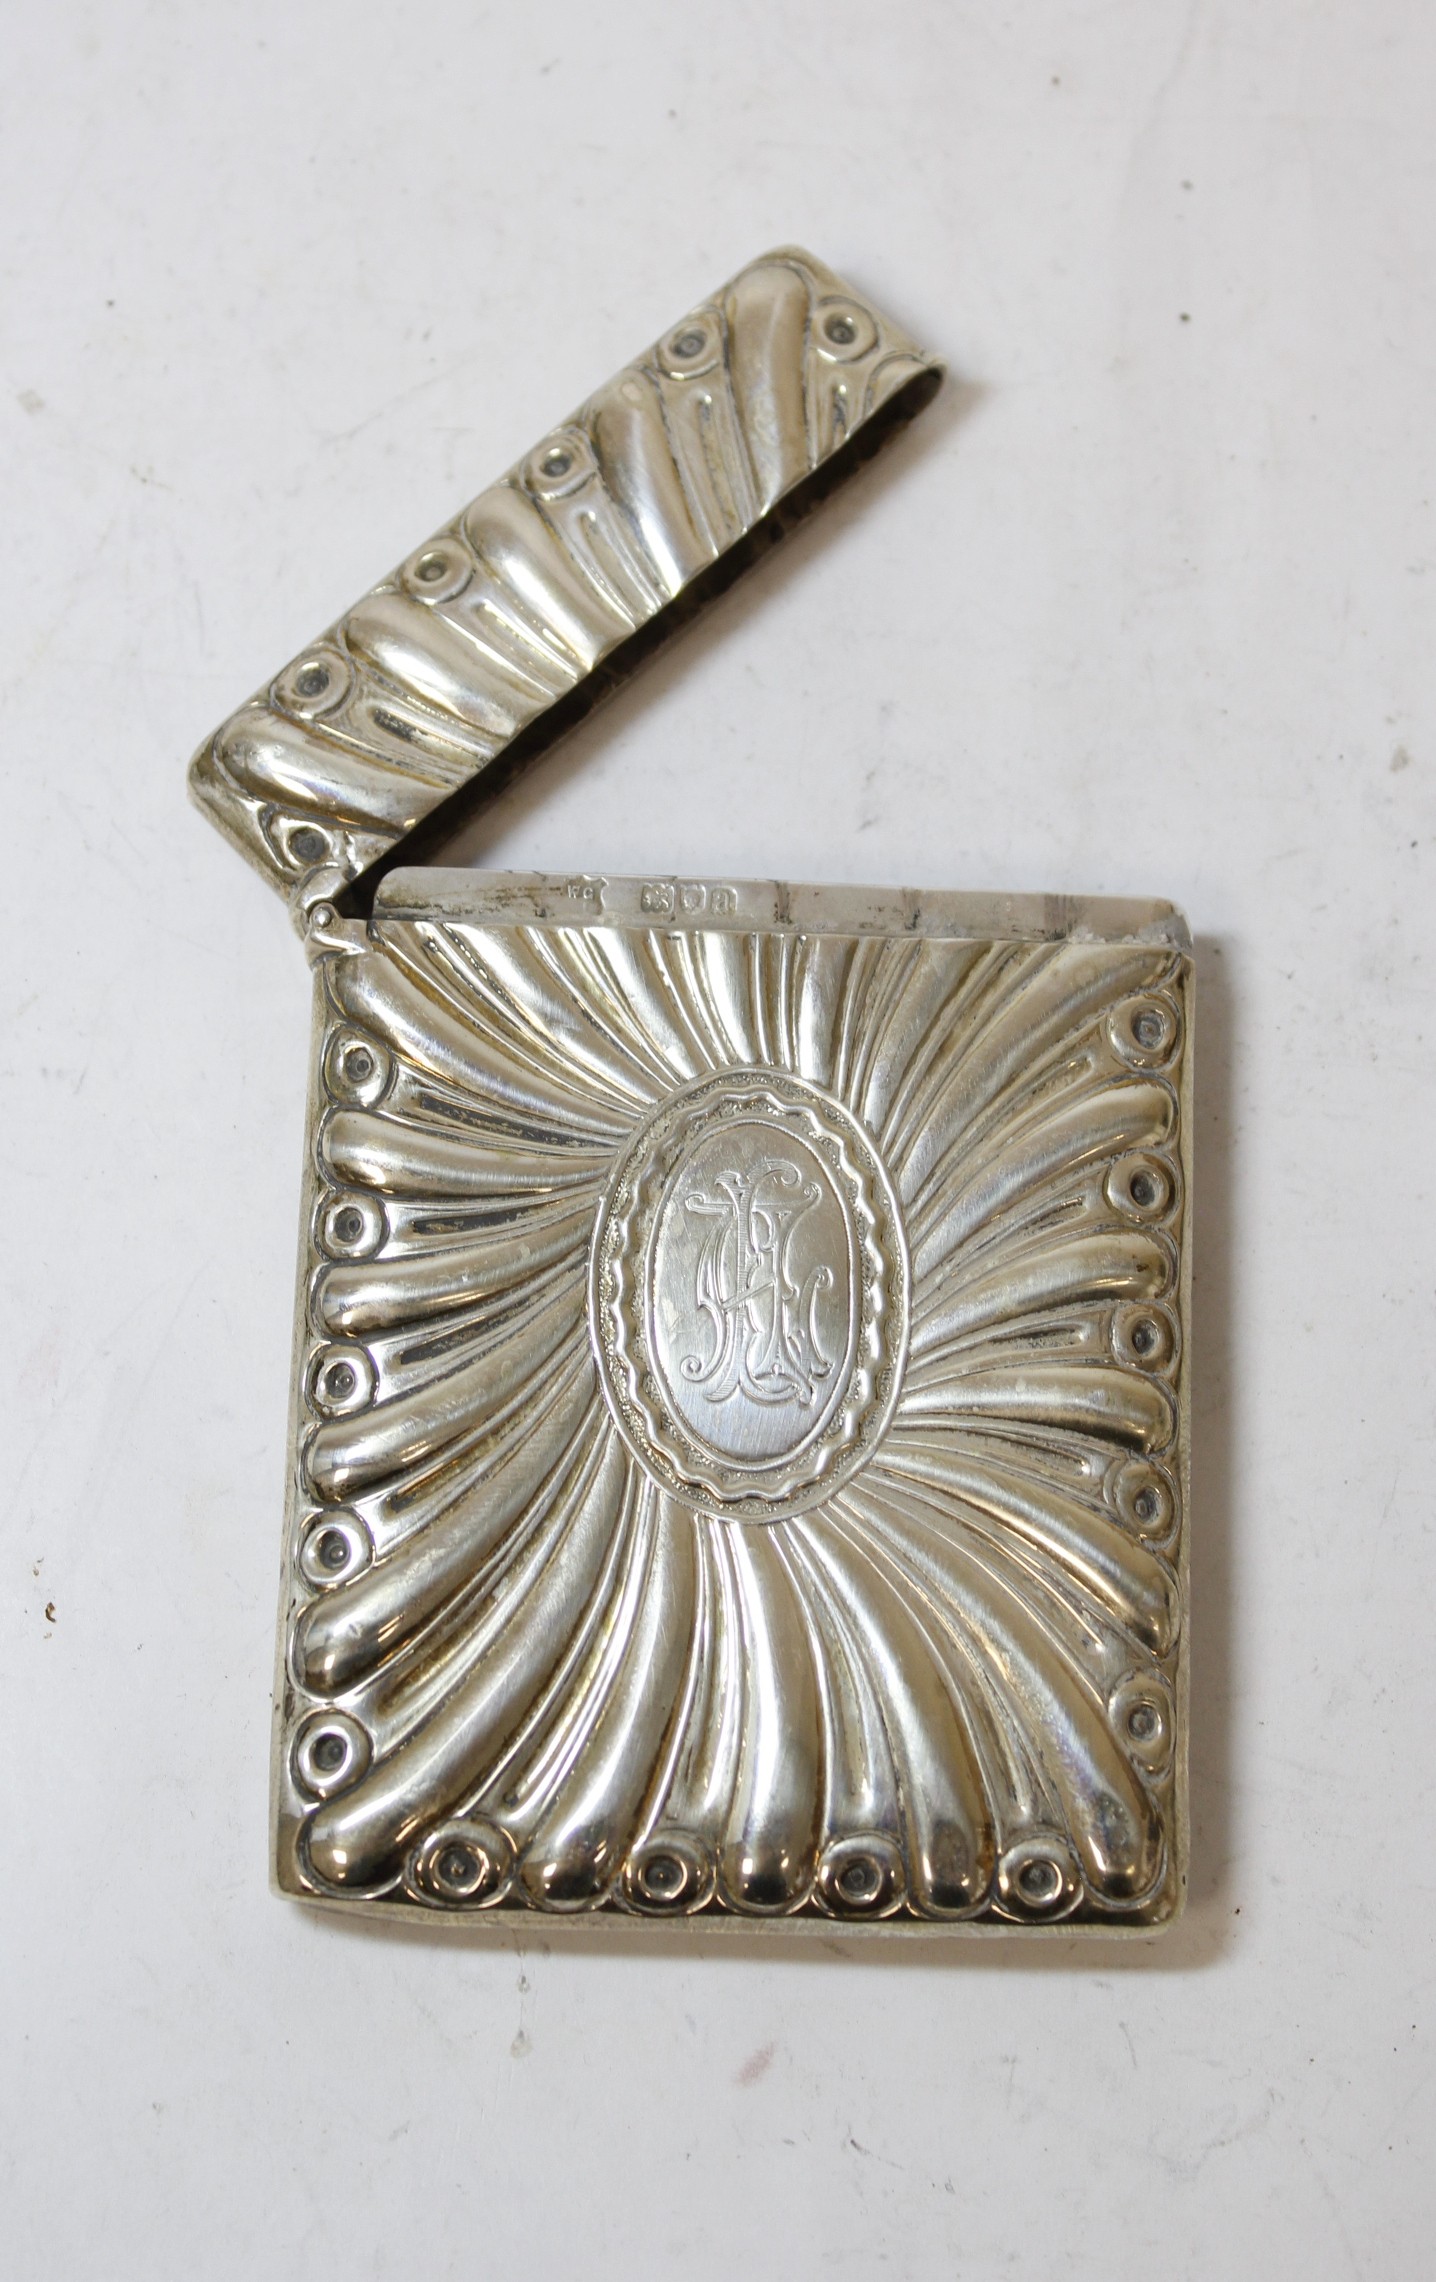 Silver card case with radiating embossing by W. Comyns 1899, 138g. - Image 3 of 7